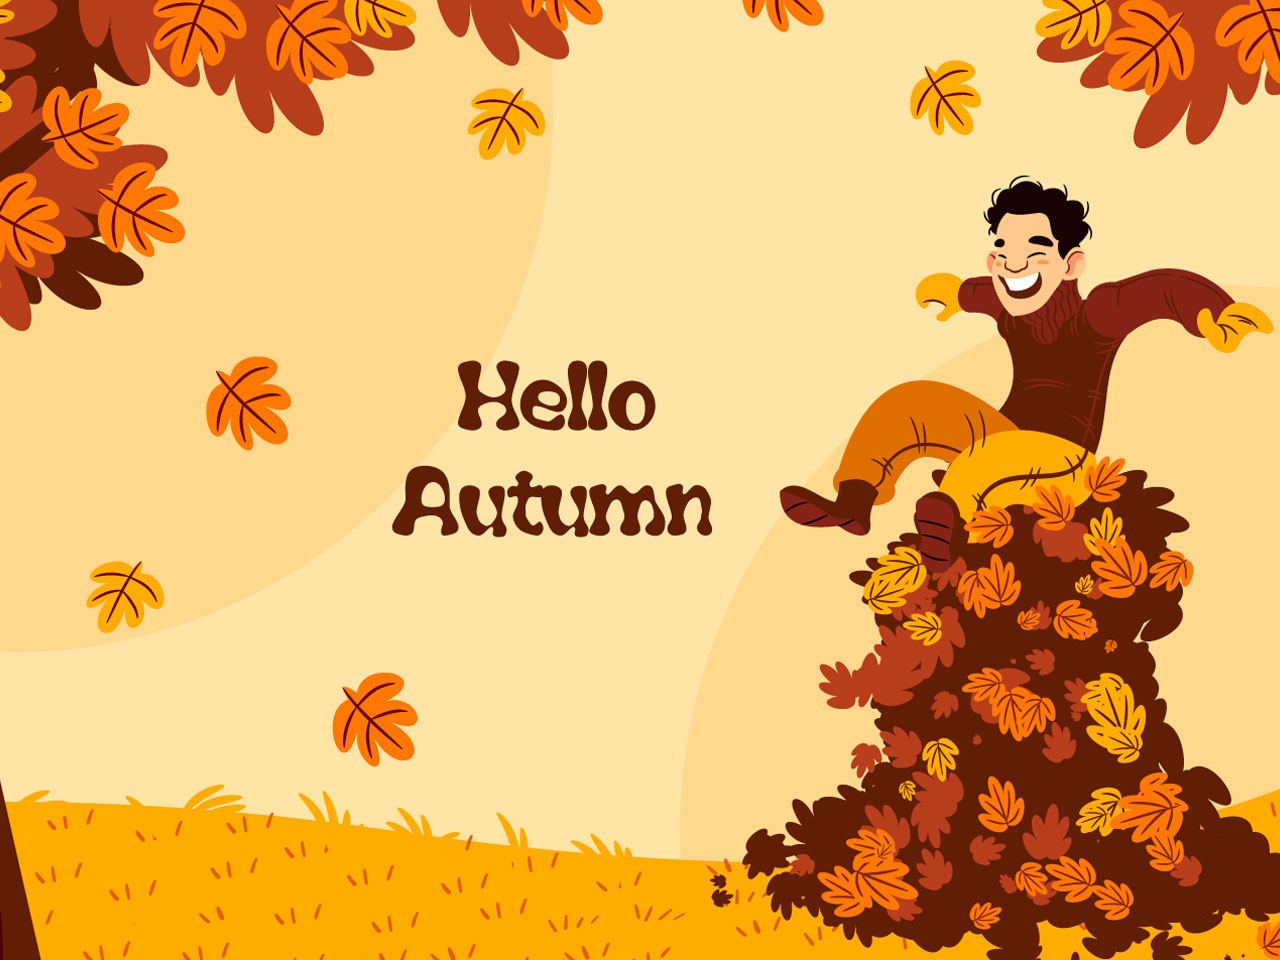 Hi clipart hand drawn flat autumn background hand drawing sketch